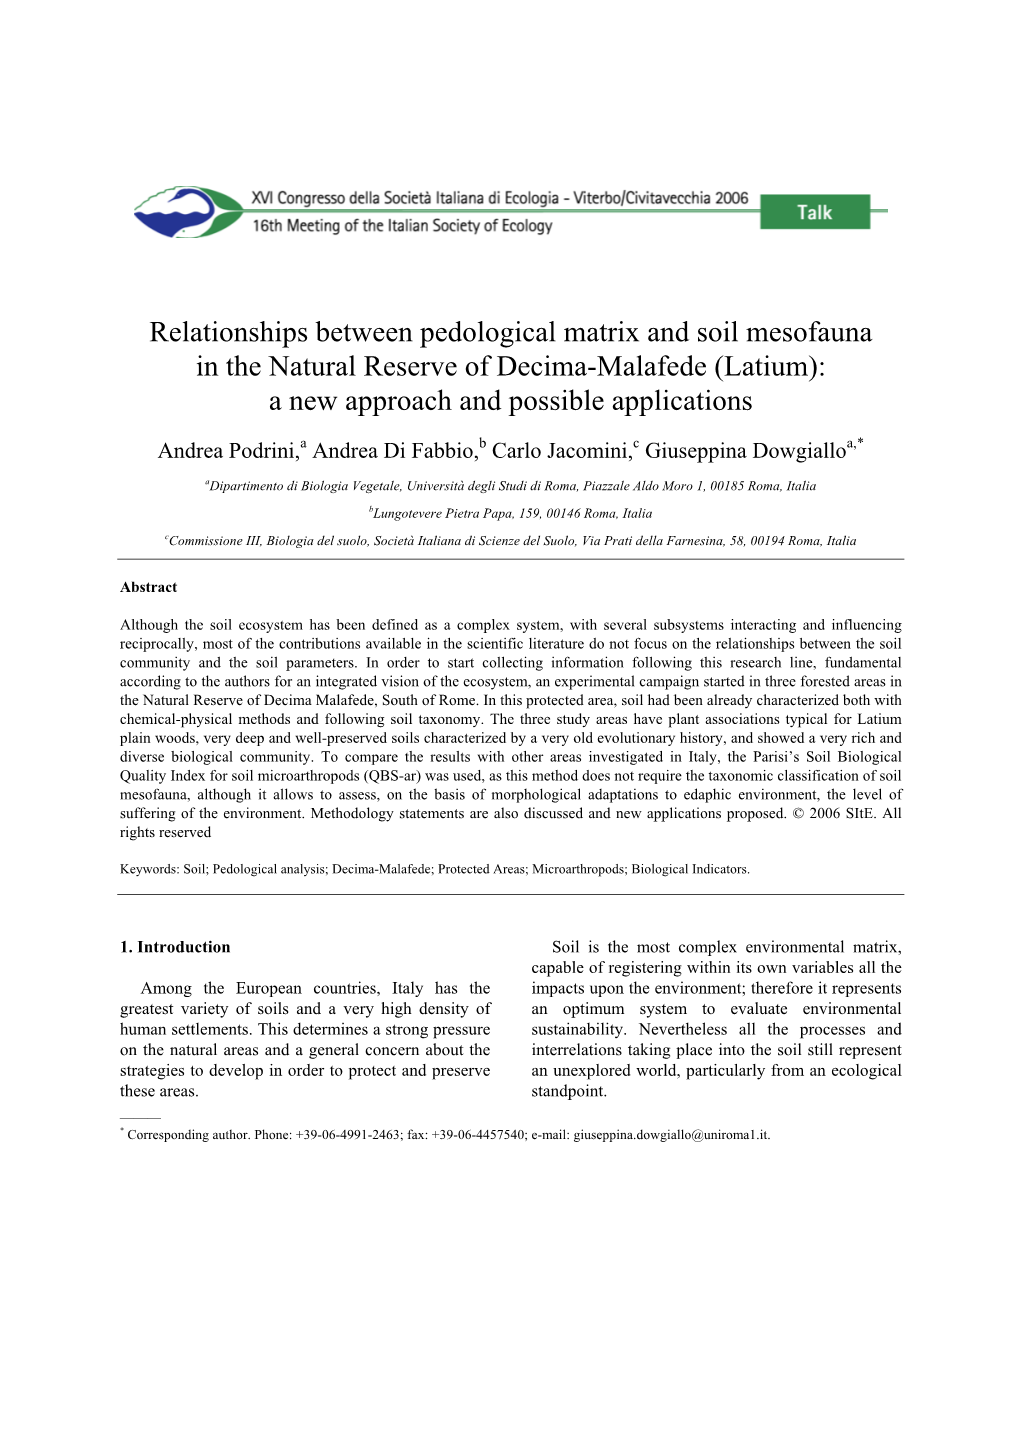 Relationships Between Pedological Matrix and Soil Mesofauna in the Natural Reserve of Decima-Malafede (Latium): a New Approach and Possible Applications